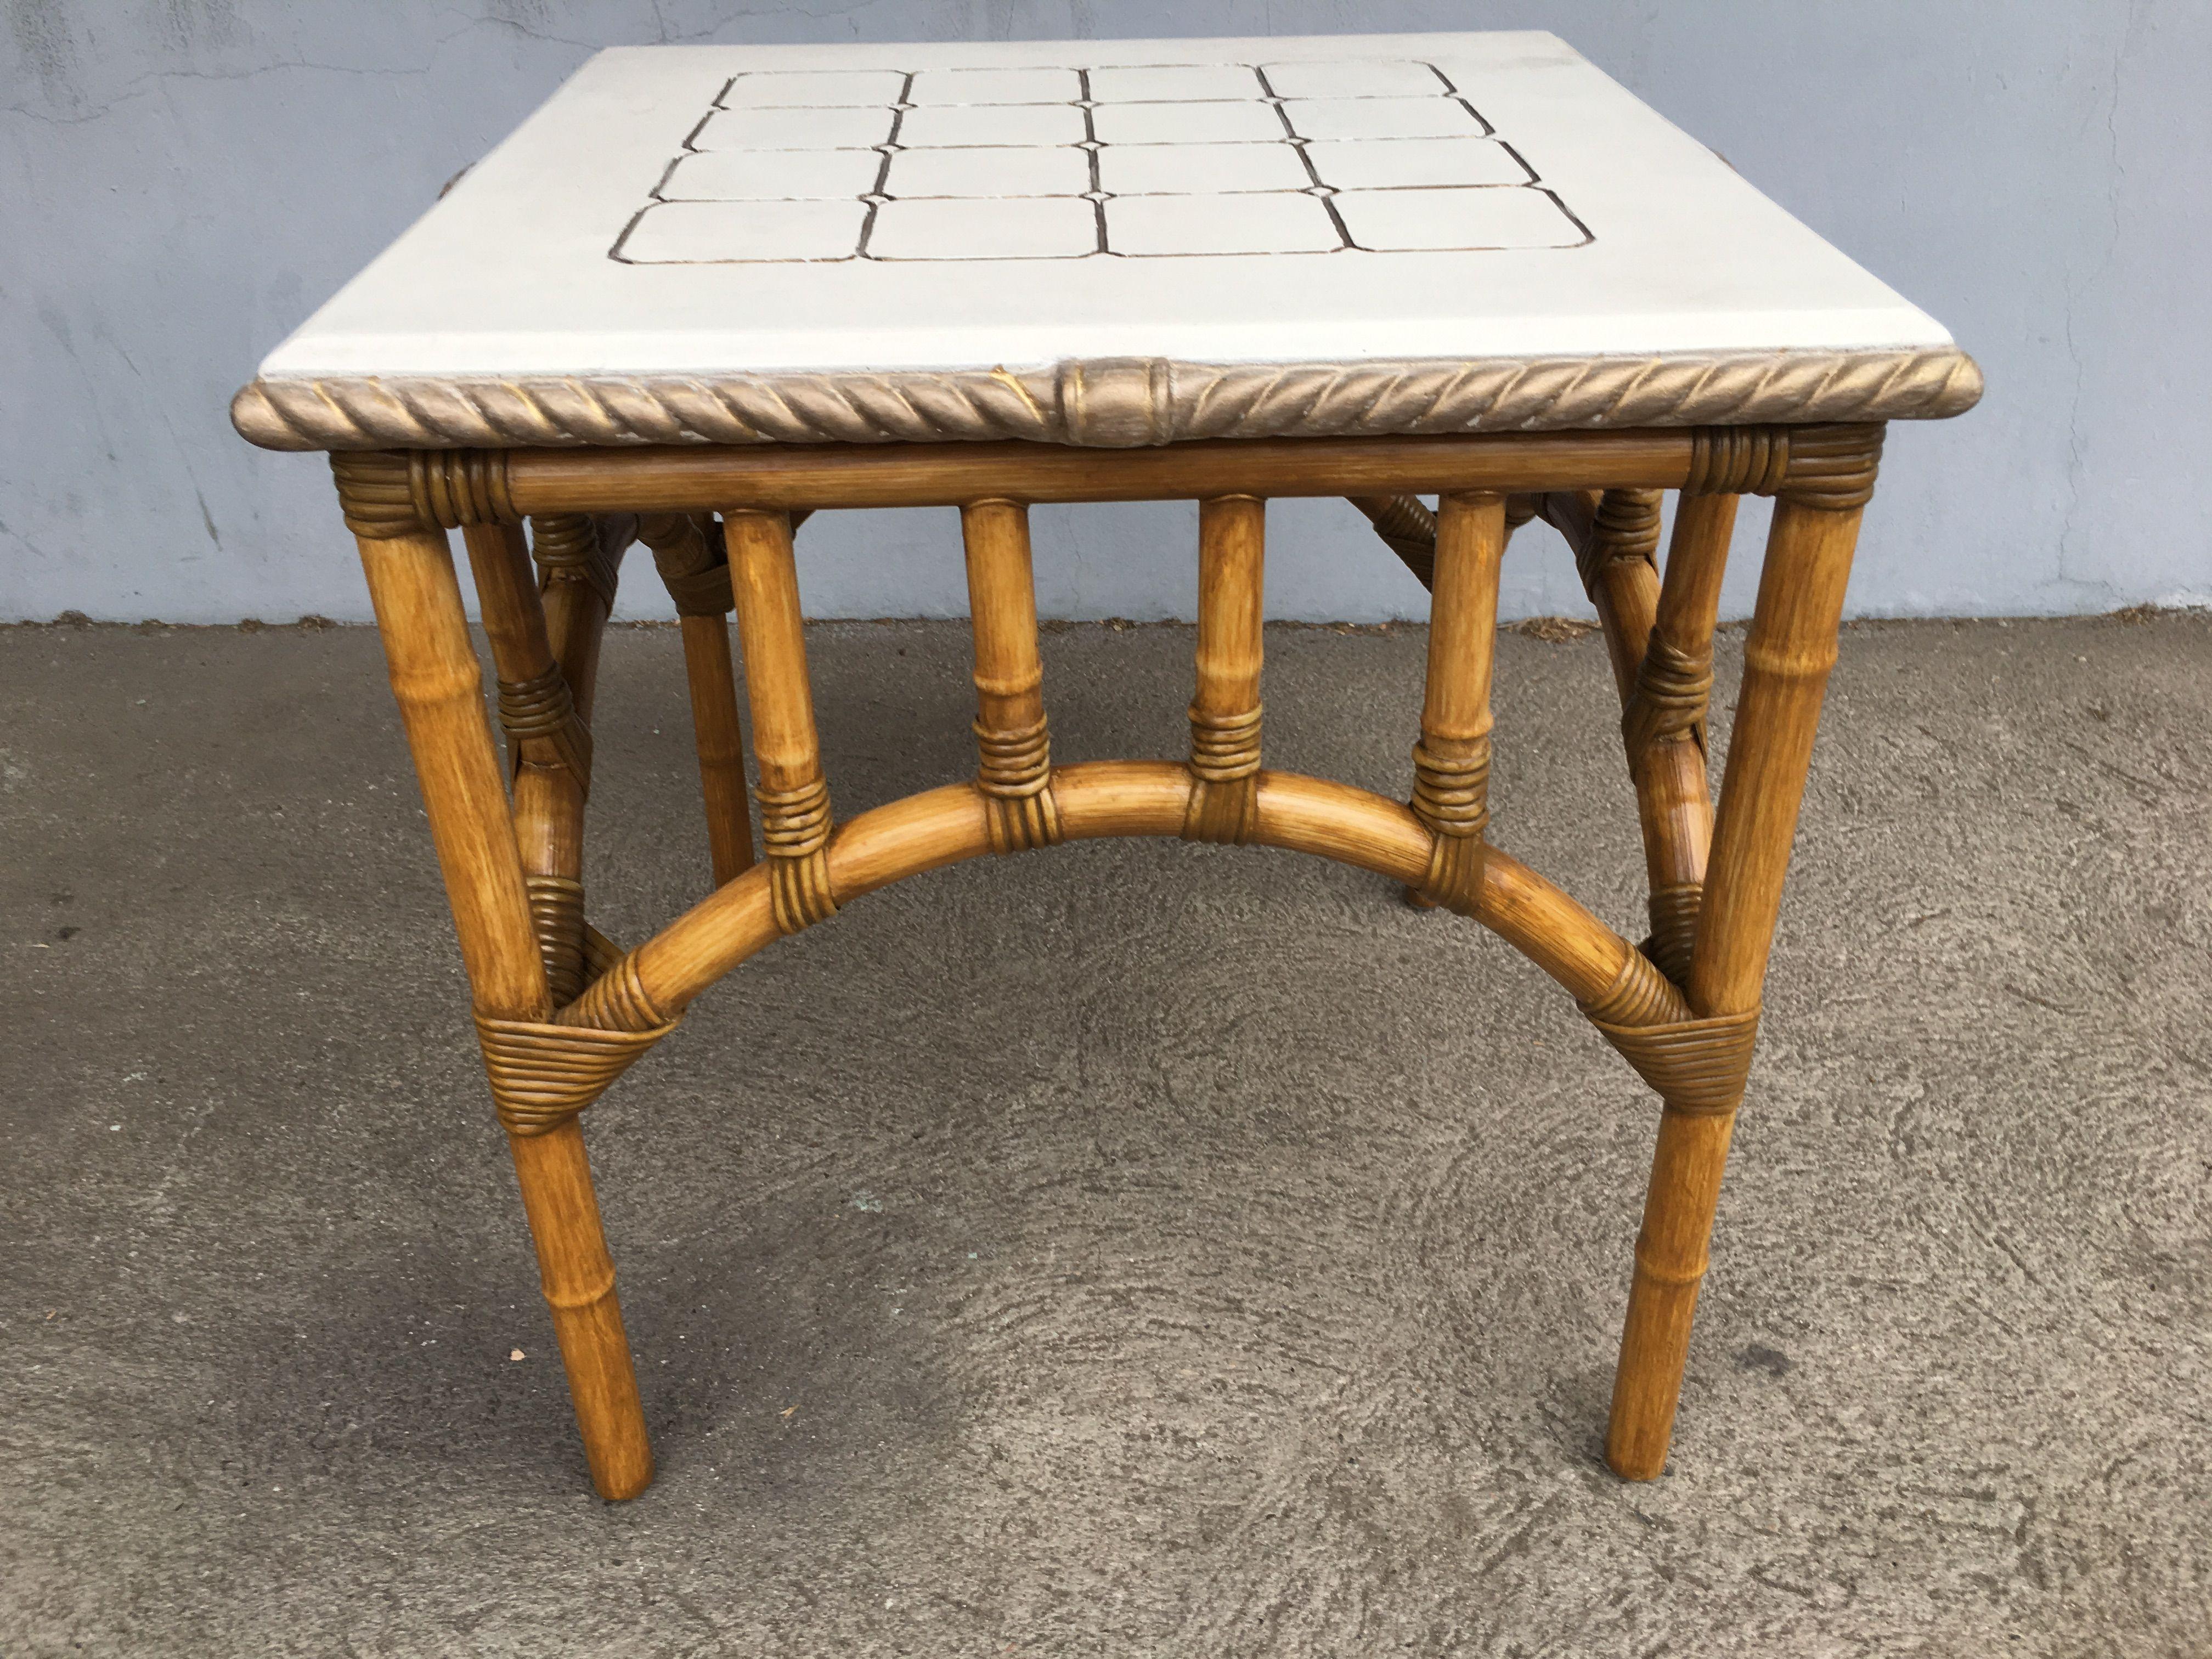 Vintage pole rattan center coffee table featuring an arched base with square patterned solid resin top, circa 1980 restored to new for you. All rattan, bamboo and wicker furniture has been painstakingly refurbished to the highest standards with the